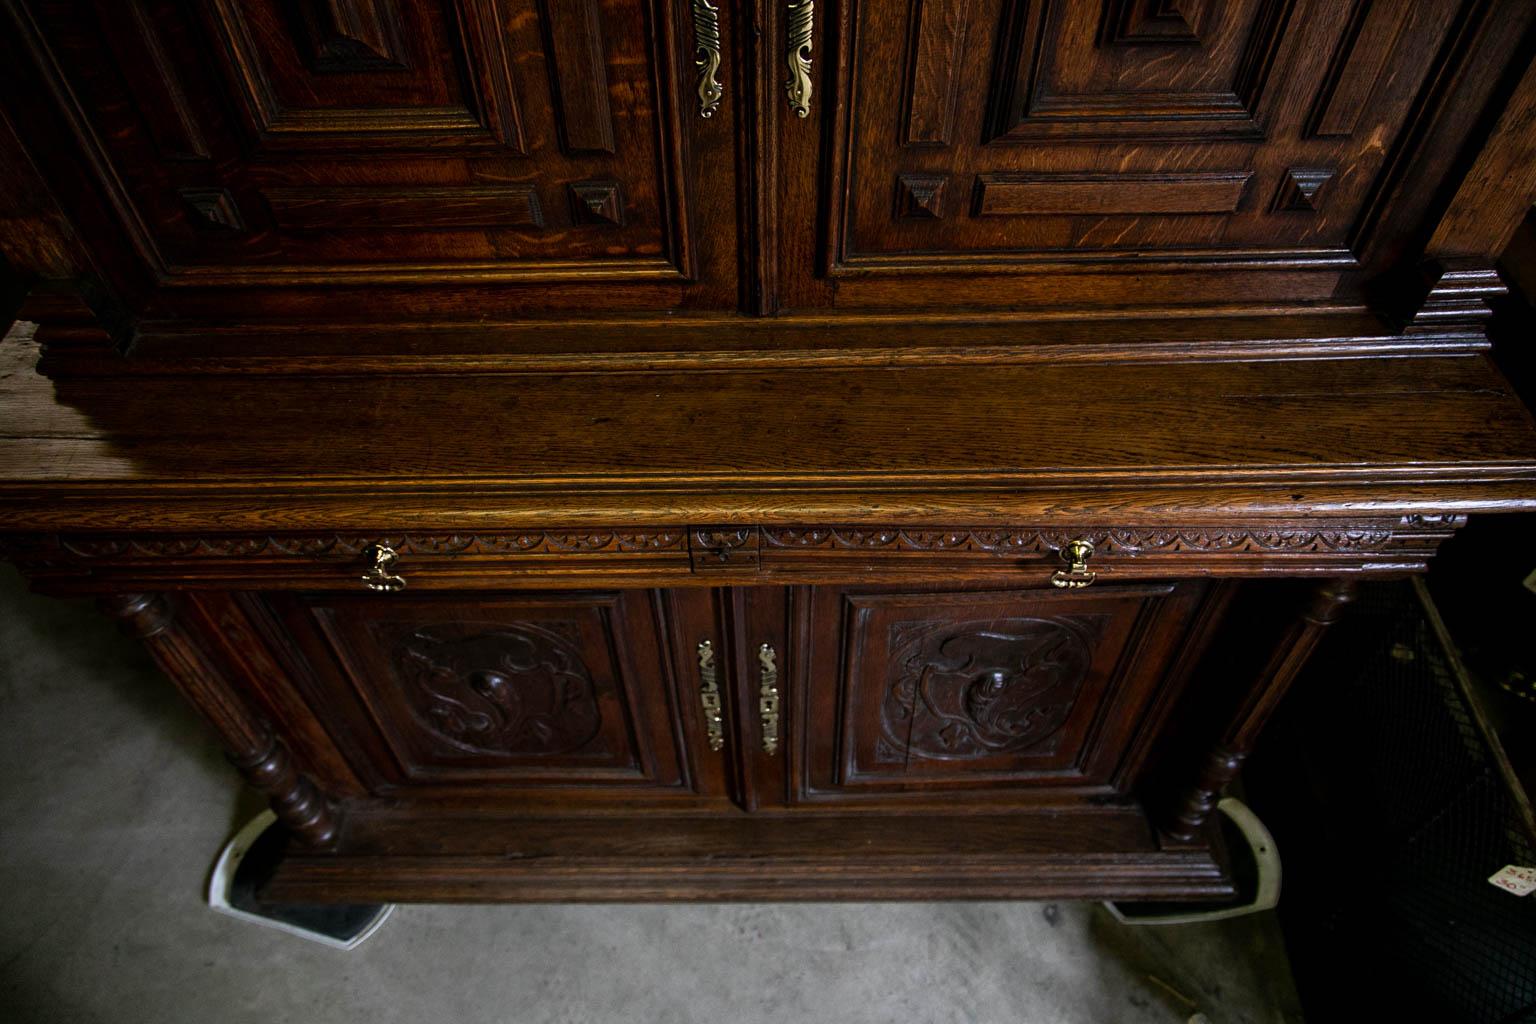 The doors in the upper section of this cupboard have applied carved moldings and panels. The lower doors have carved foliate cartouches framed by shaped moldings. The drawer fronts have repeating carved half-rosettes. The bottom section has fluted